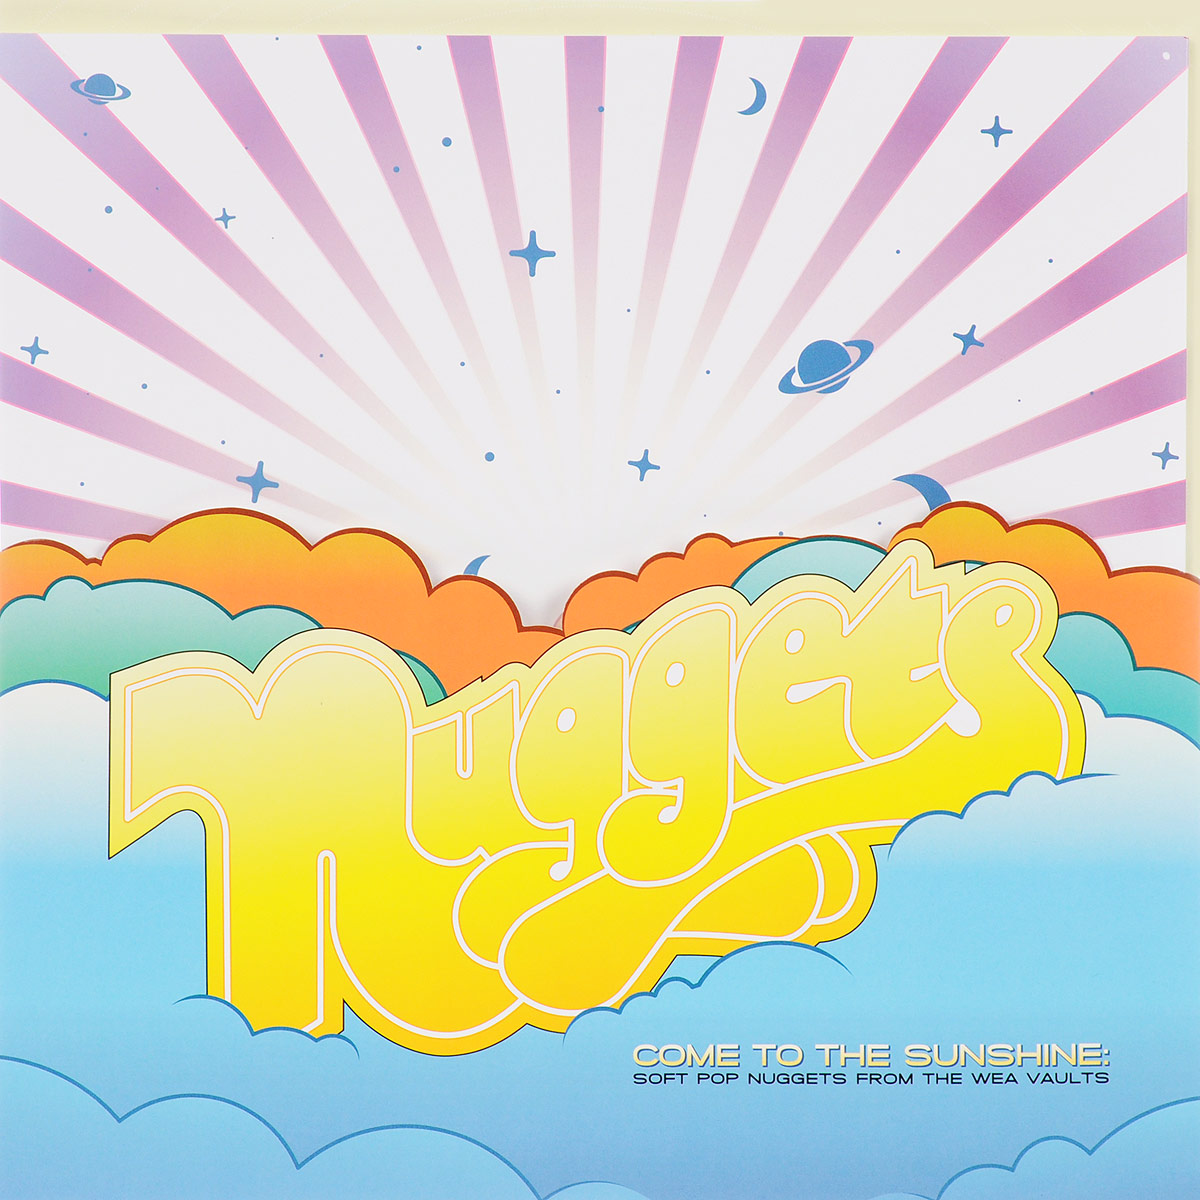 Nuggets. Come To The Sunshine. Soft Pop Nuggets From The Wea Vaults (2 CD)